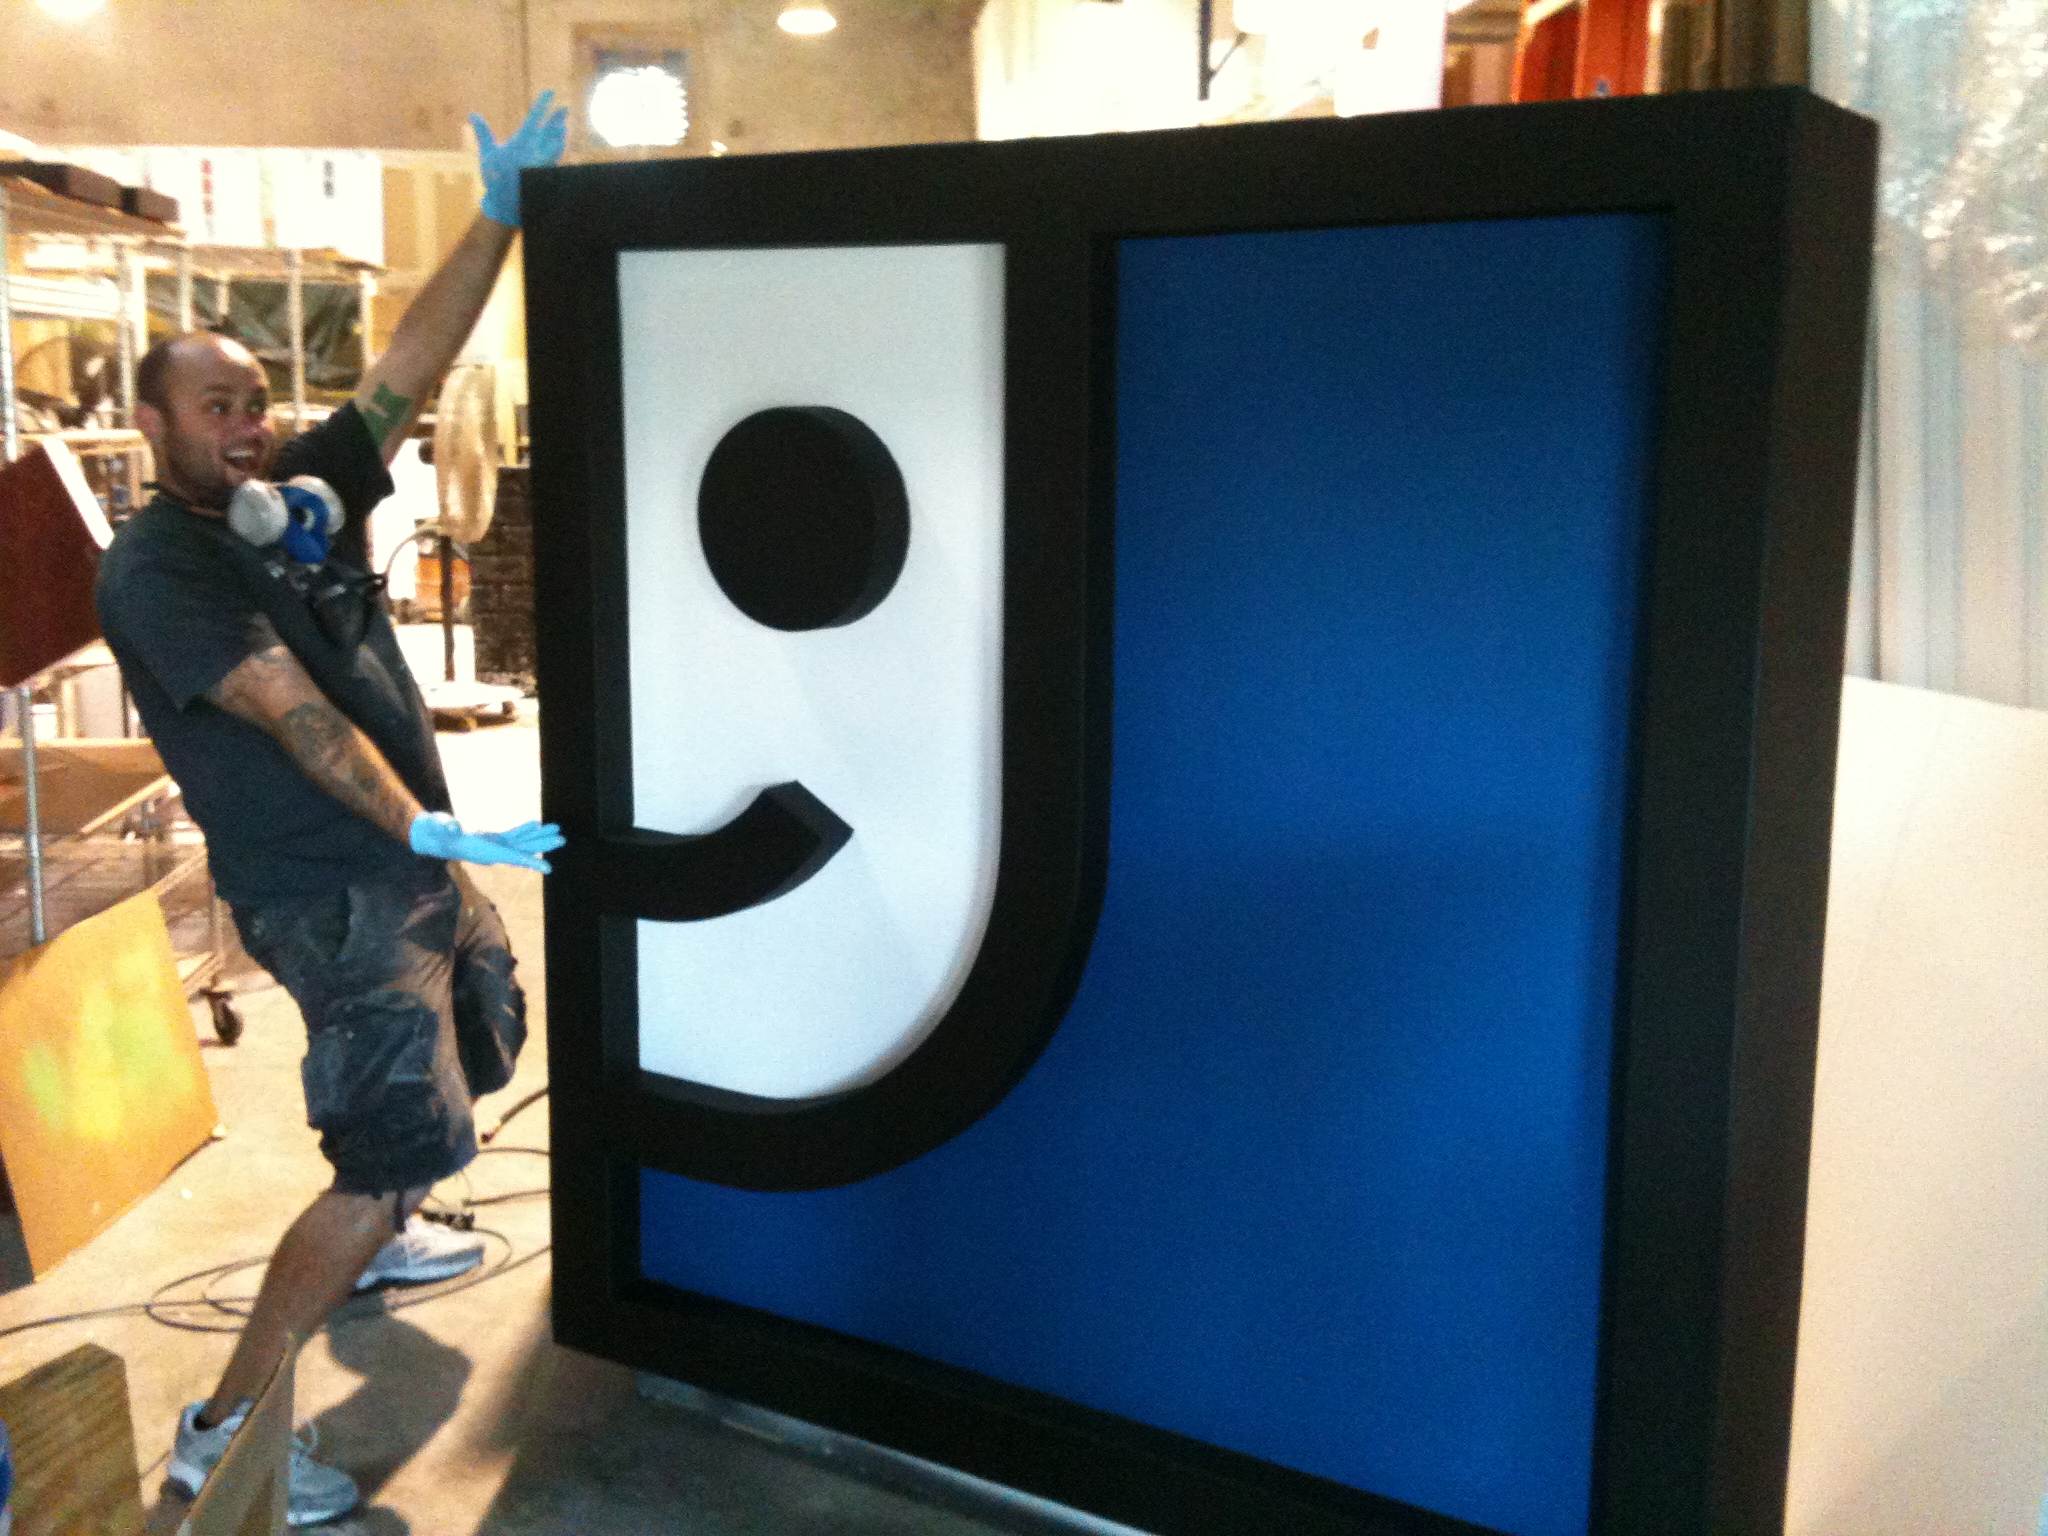 Custom Foam Sculptured Logo Letter  Displays for Events and Tradeshows